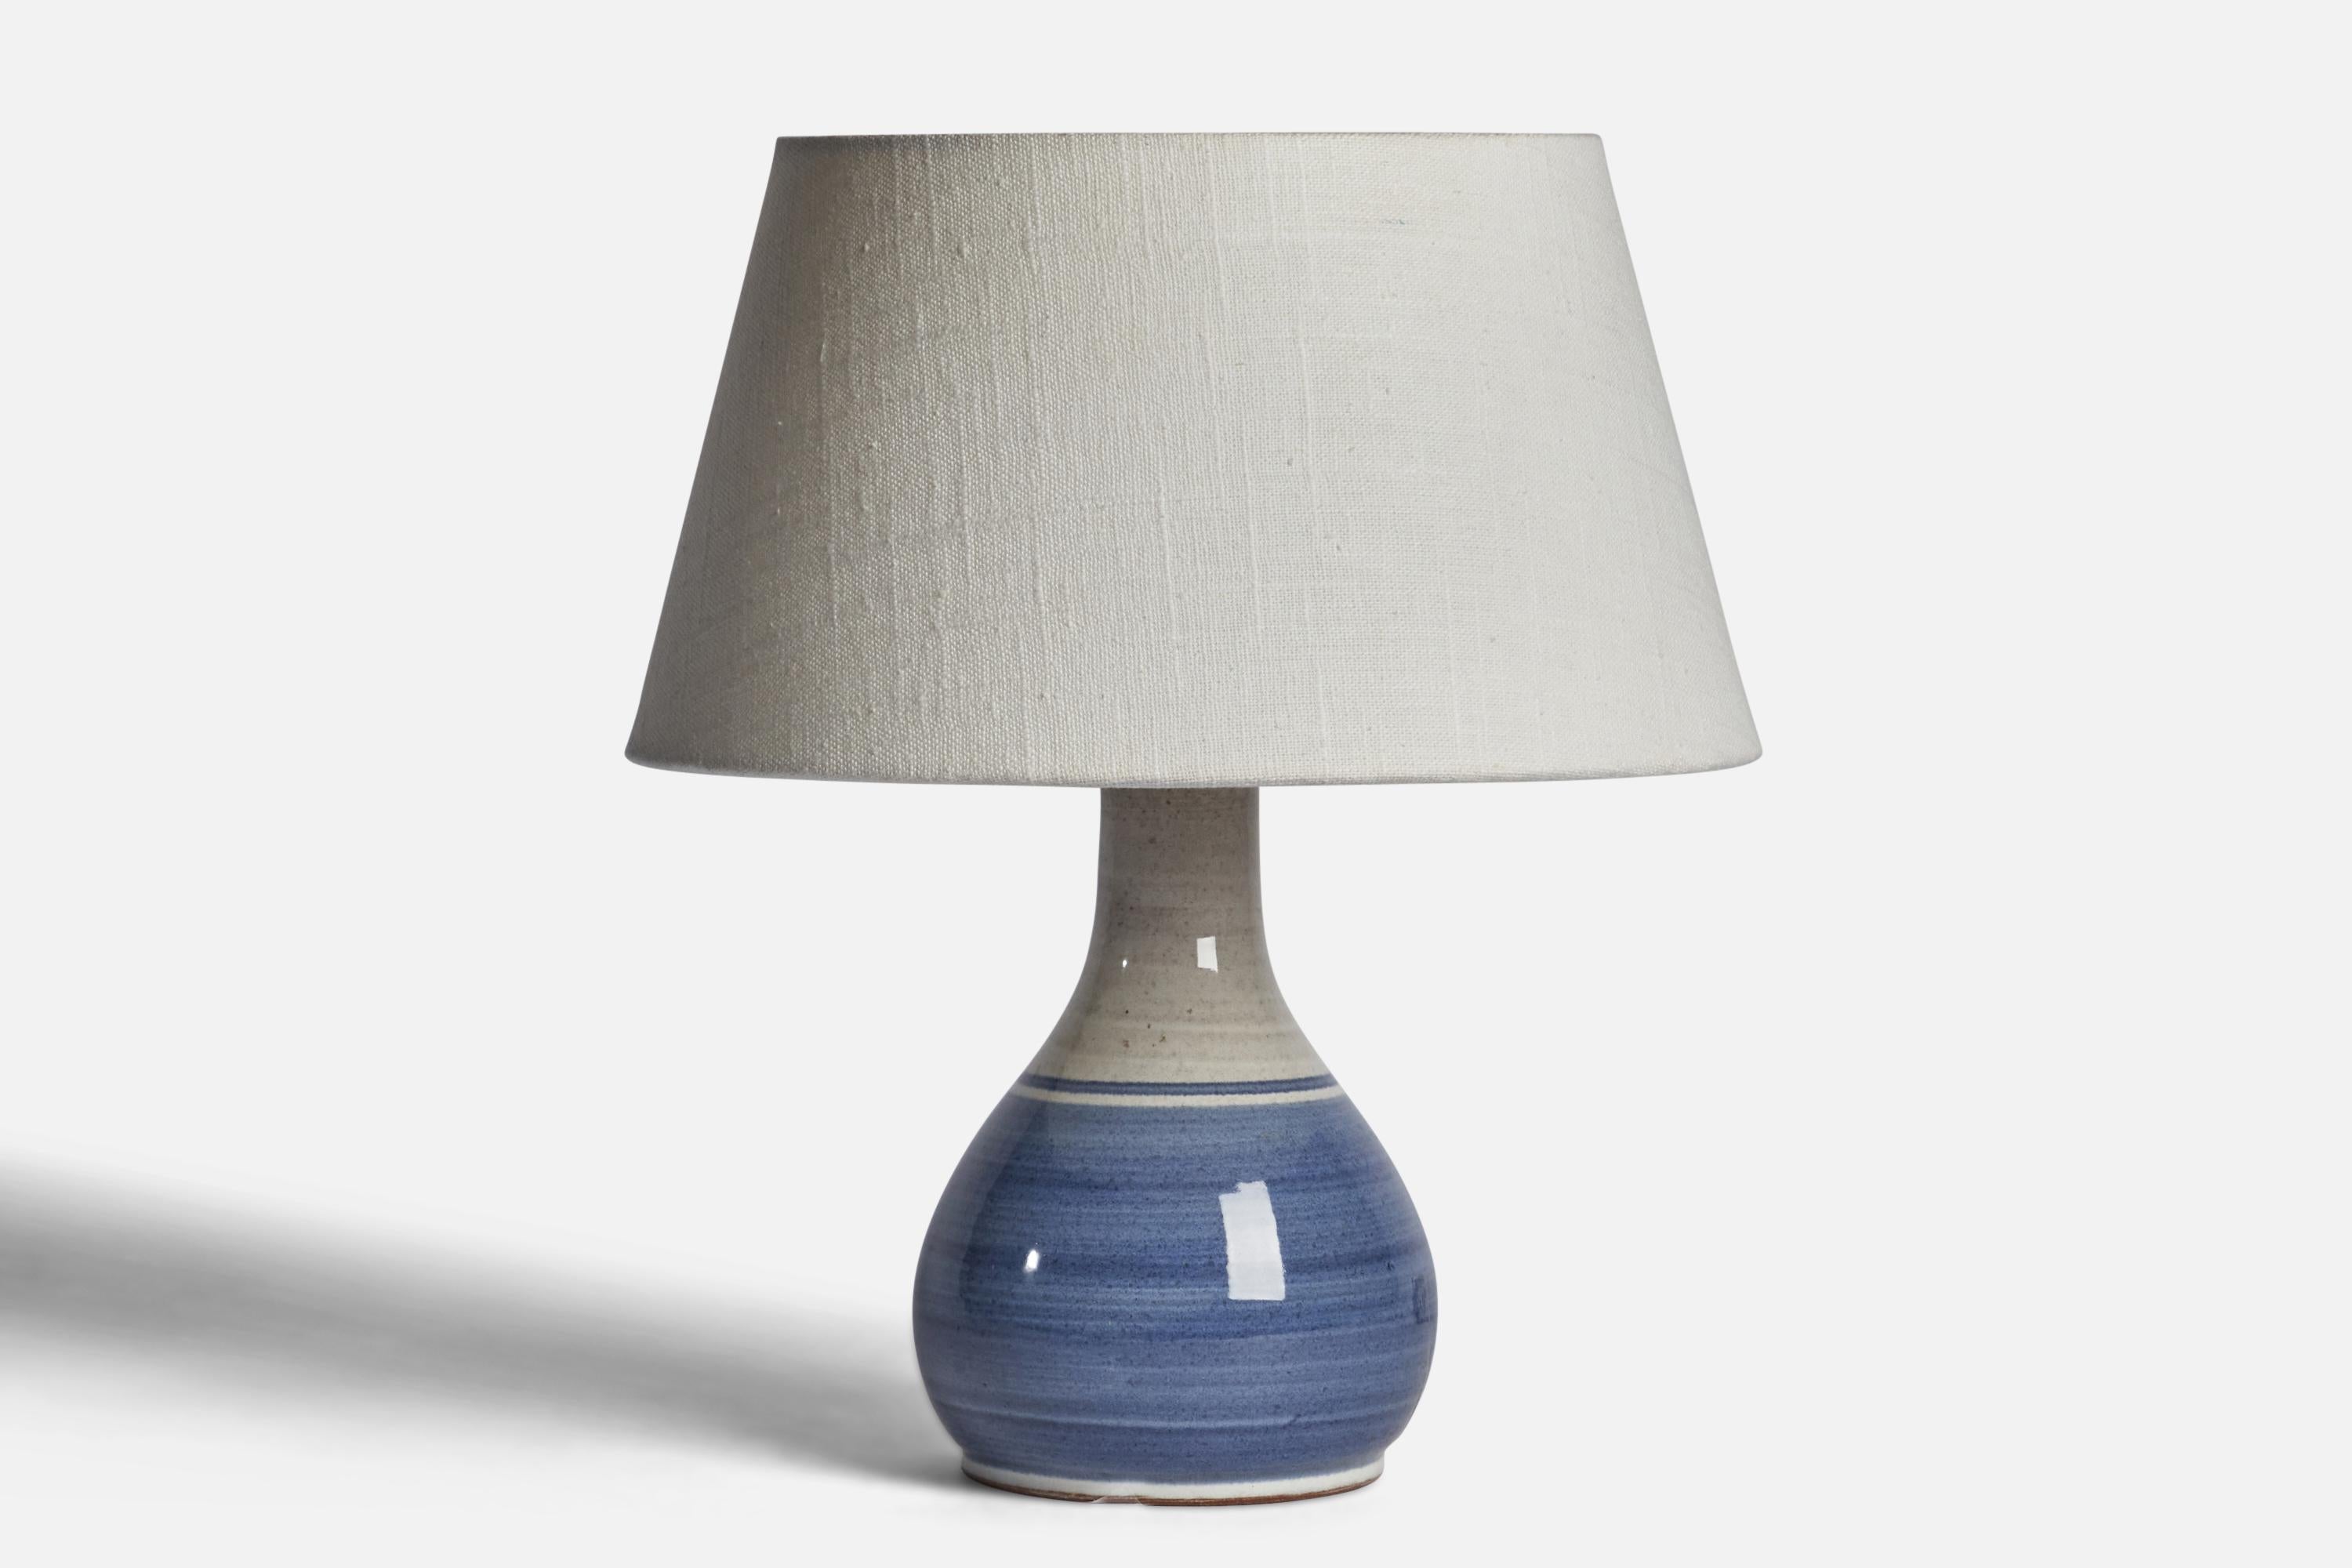 A blue and grey-glazed ceramic table lamp designed and produced in Sweden, c. 1960s.

Dimensions of Lamp (inches): 8.65” H x 4.35” Diameter
Dimensions of Shade (inches): 7” Top Diameter x 10” Bottom Diameter x 5.5” H 
Dimensions of Lamp with Shade